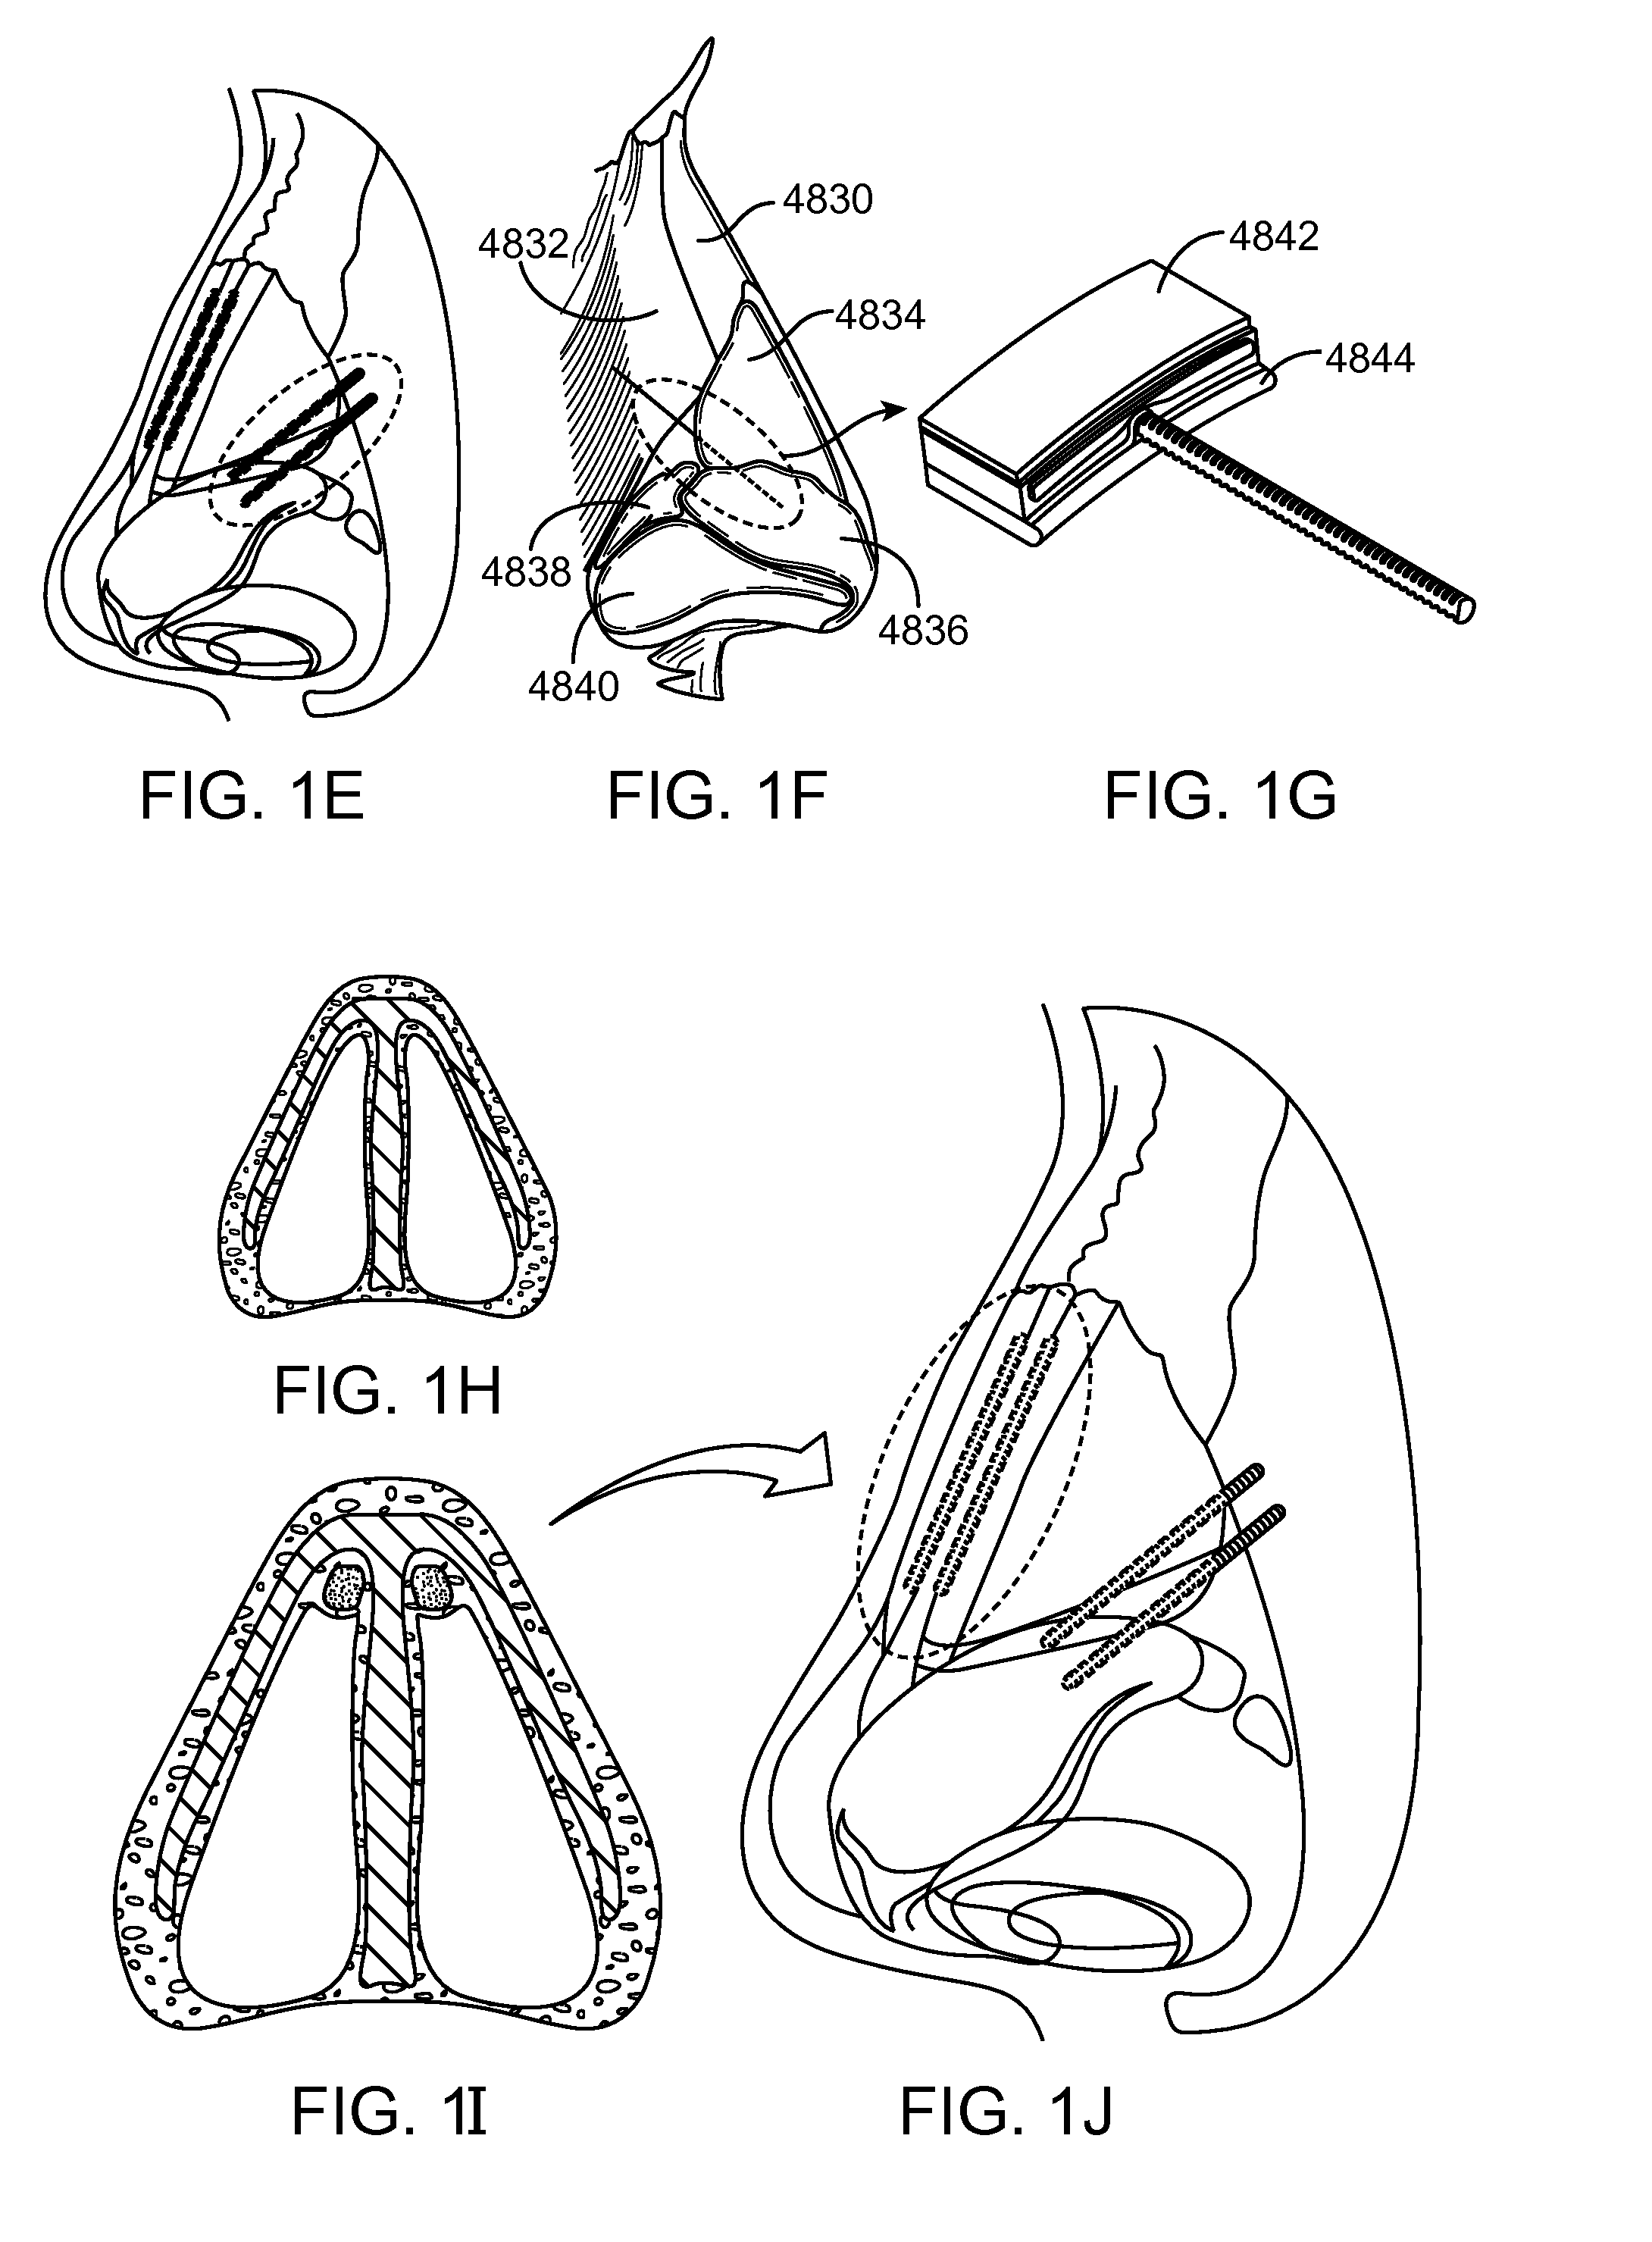 Nasal implants and systems and methods of use